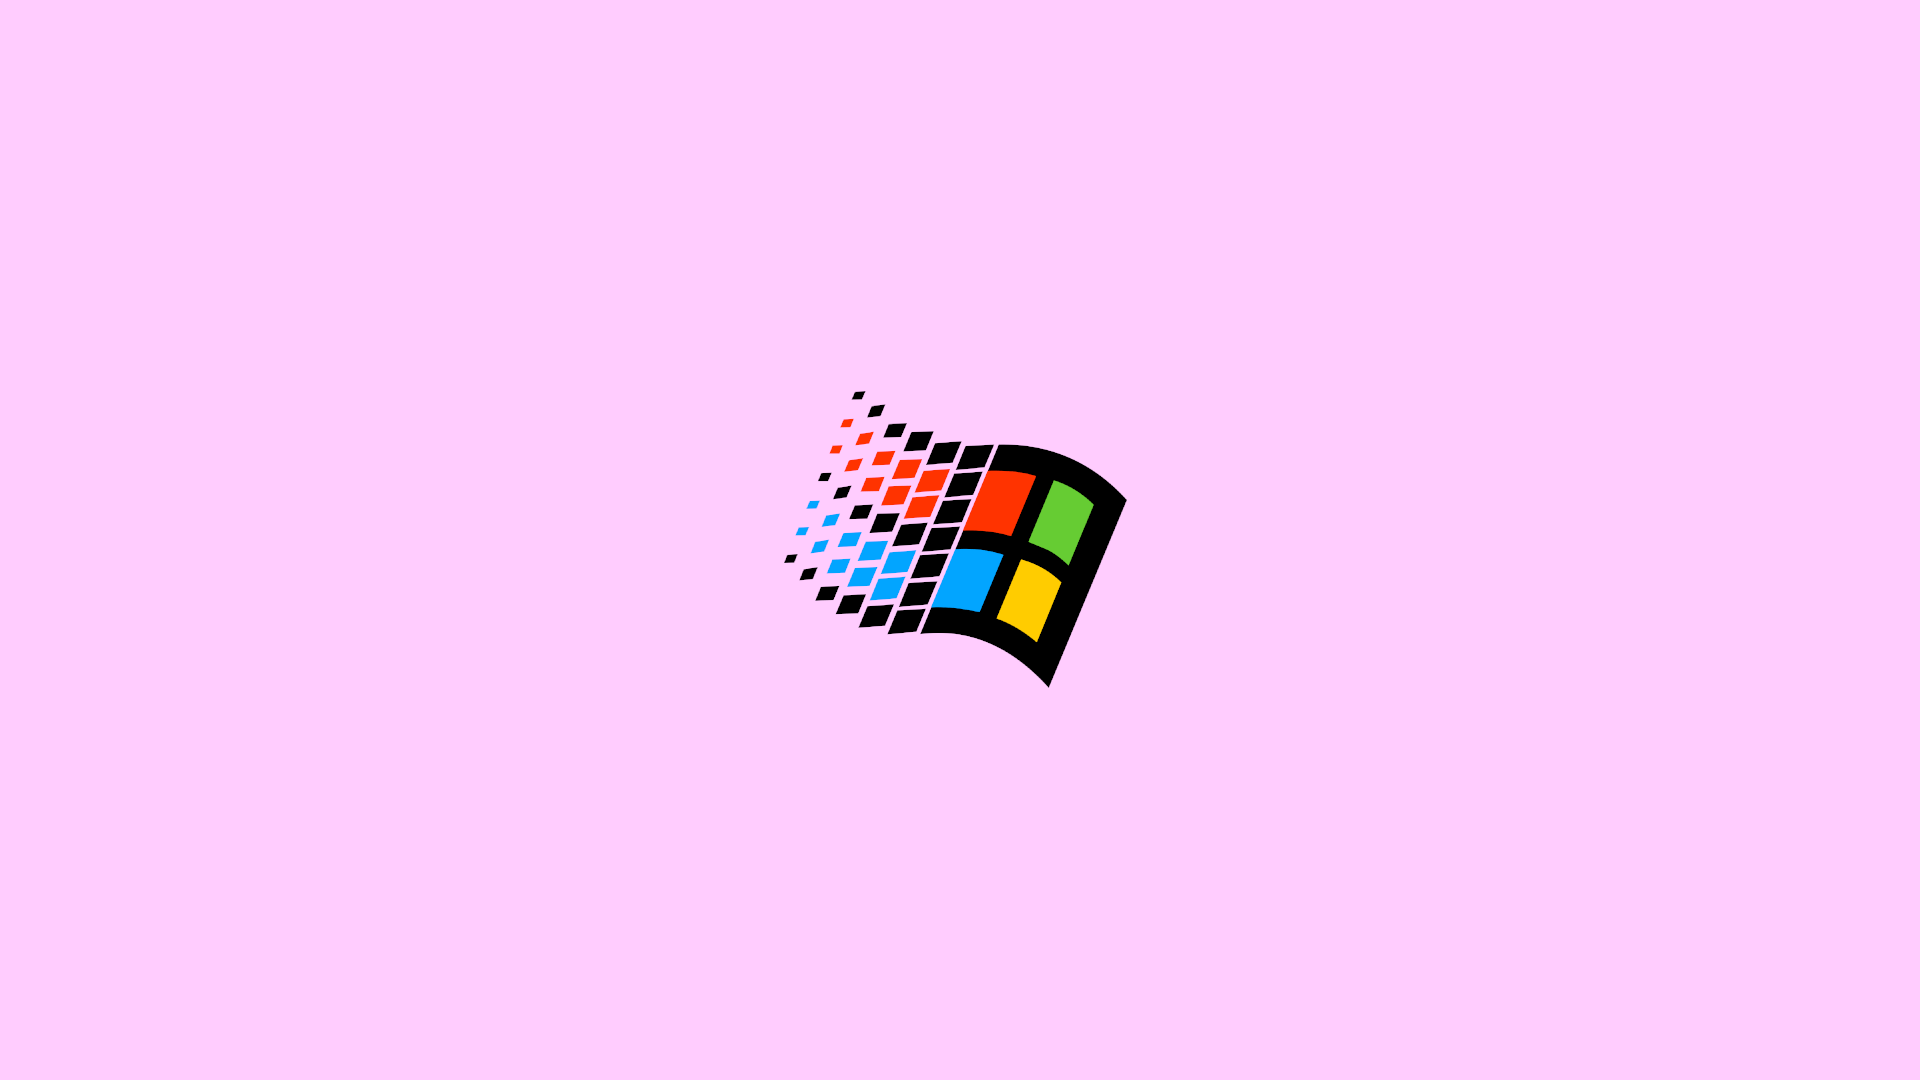 A Microsoft Windows logo in a square format with a pink background - Windows 95, Windows 98